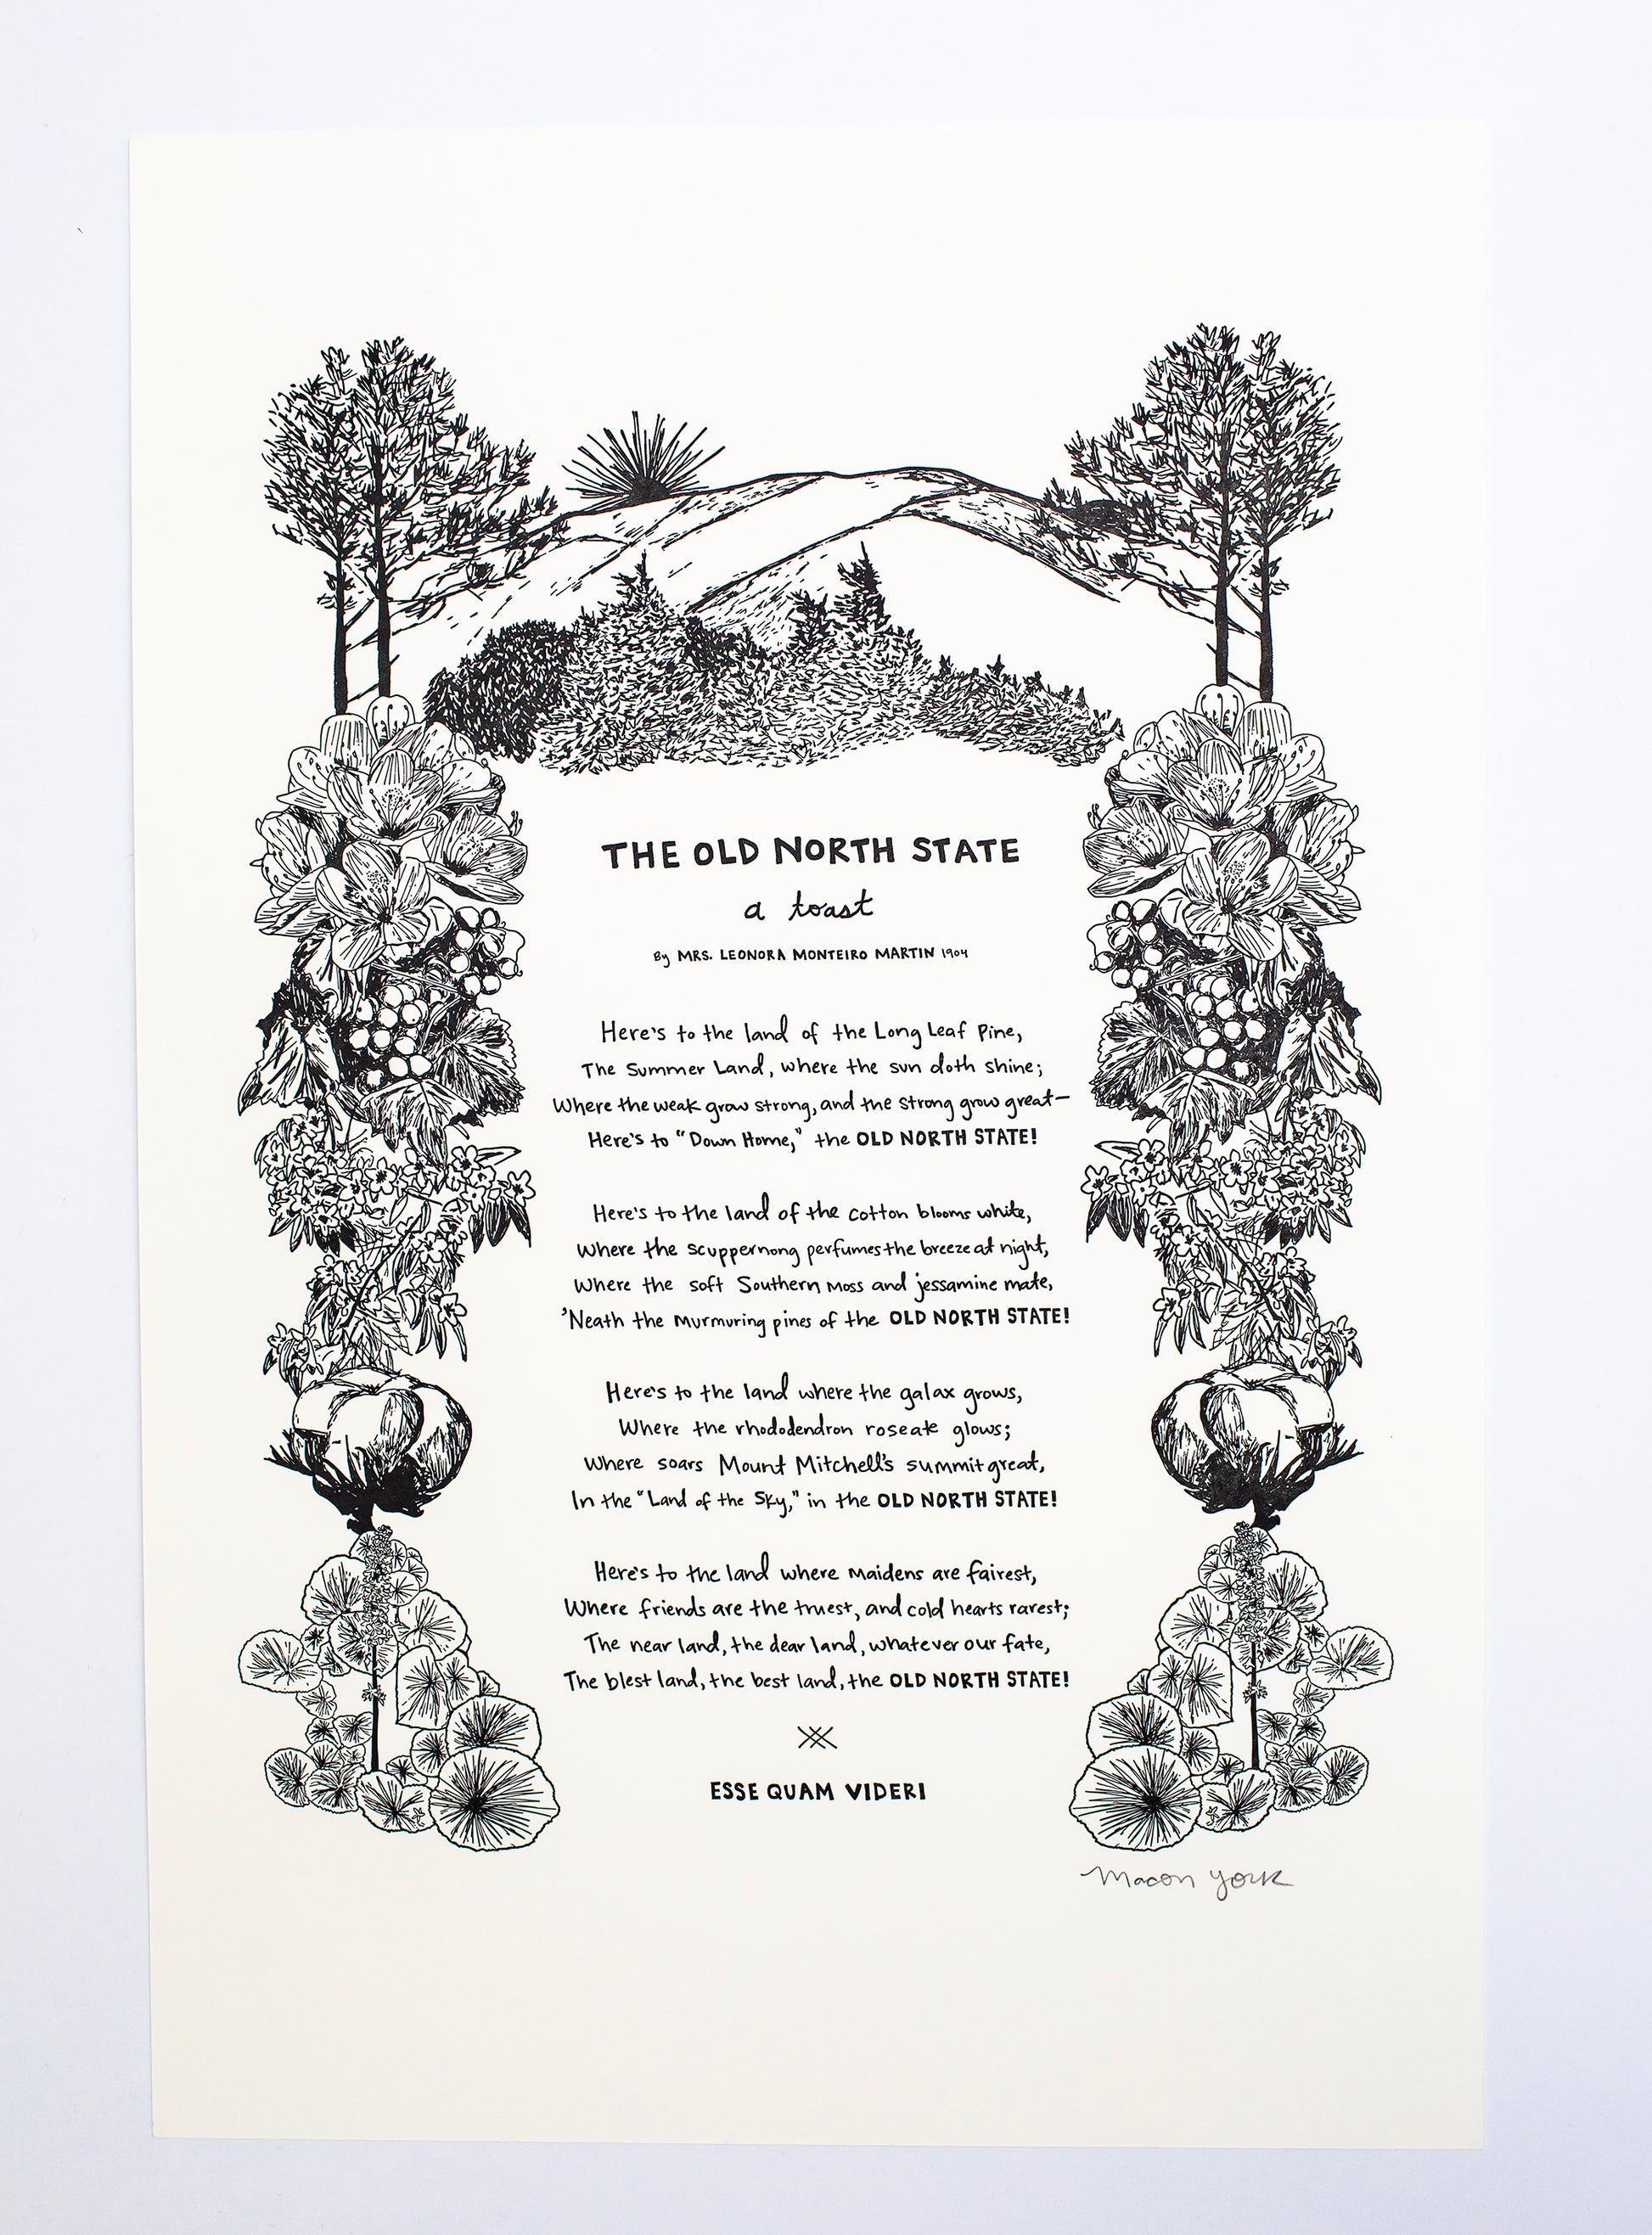 Large letterpress art print featuring "The Old North State," an ode to North Carolina and all her natural beauty, written in 1904 by Mrs. Leonora Monteiro. Macon York has hand-written the entire toast in her whimsical style. All the native plants in the toast are hand-drawn to create a border around the text. 